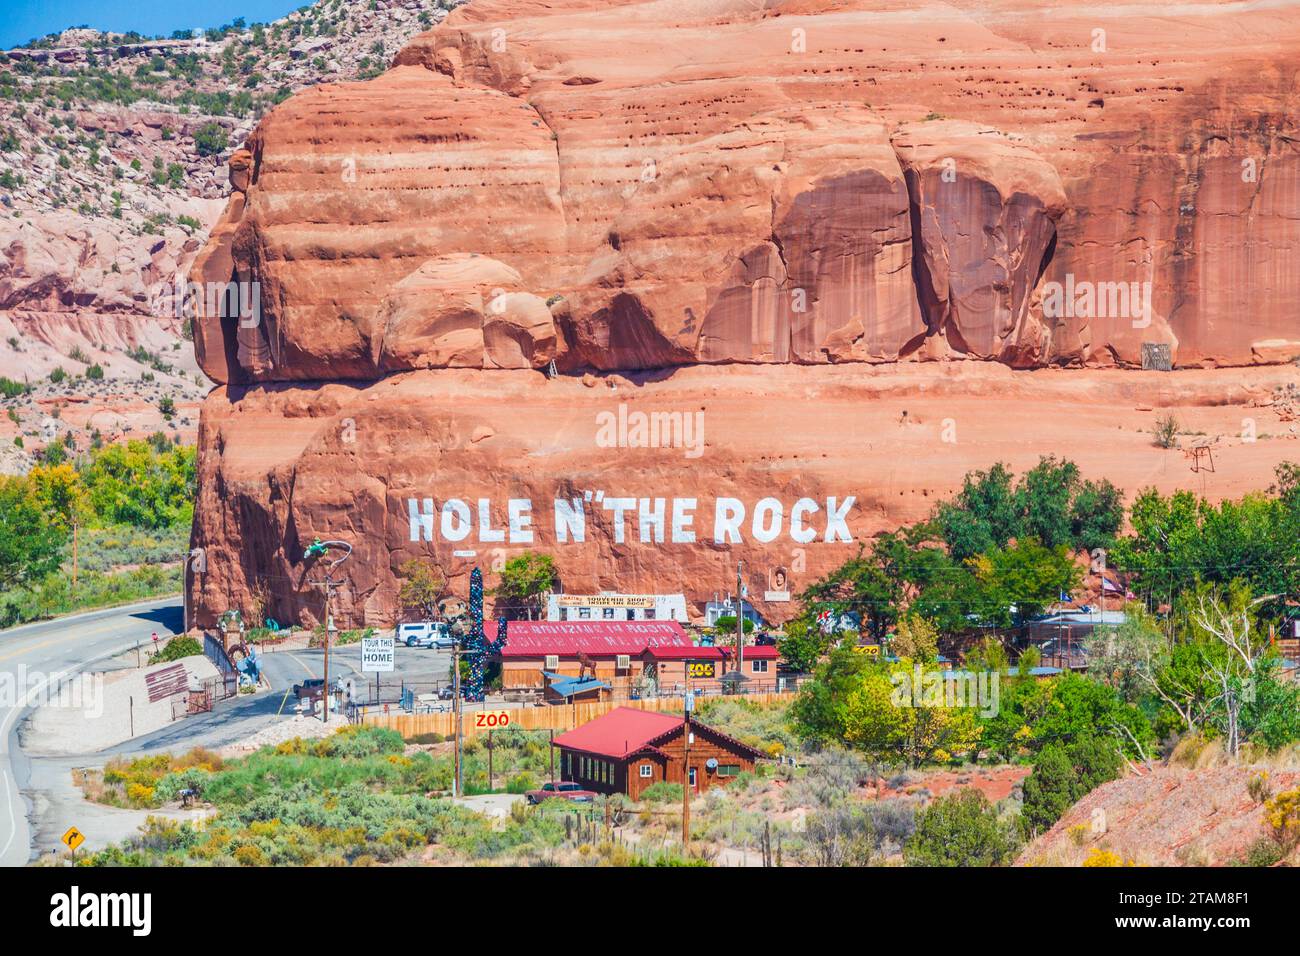 US 191 scenic highway just south of Moab, Utah, is known for sandstone rock formations. Hole in the Rock is a most unique home, carved out of rock. Stock Photo